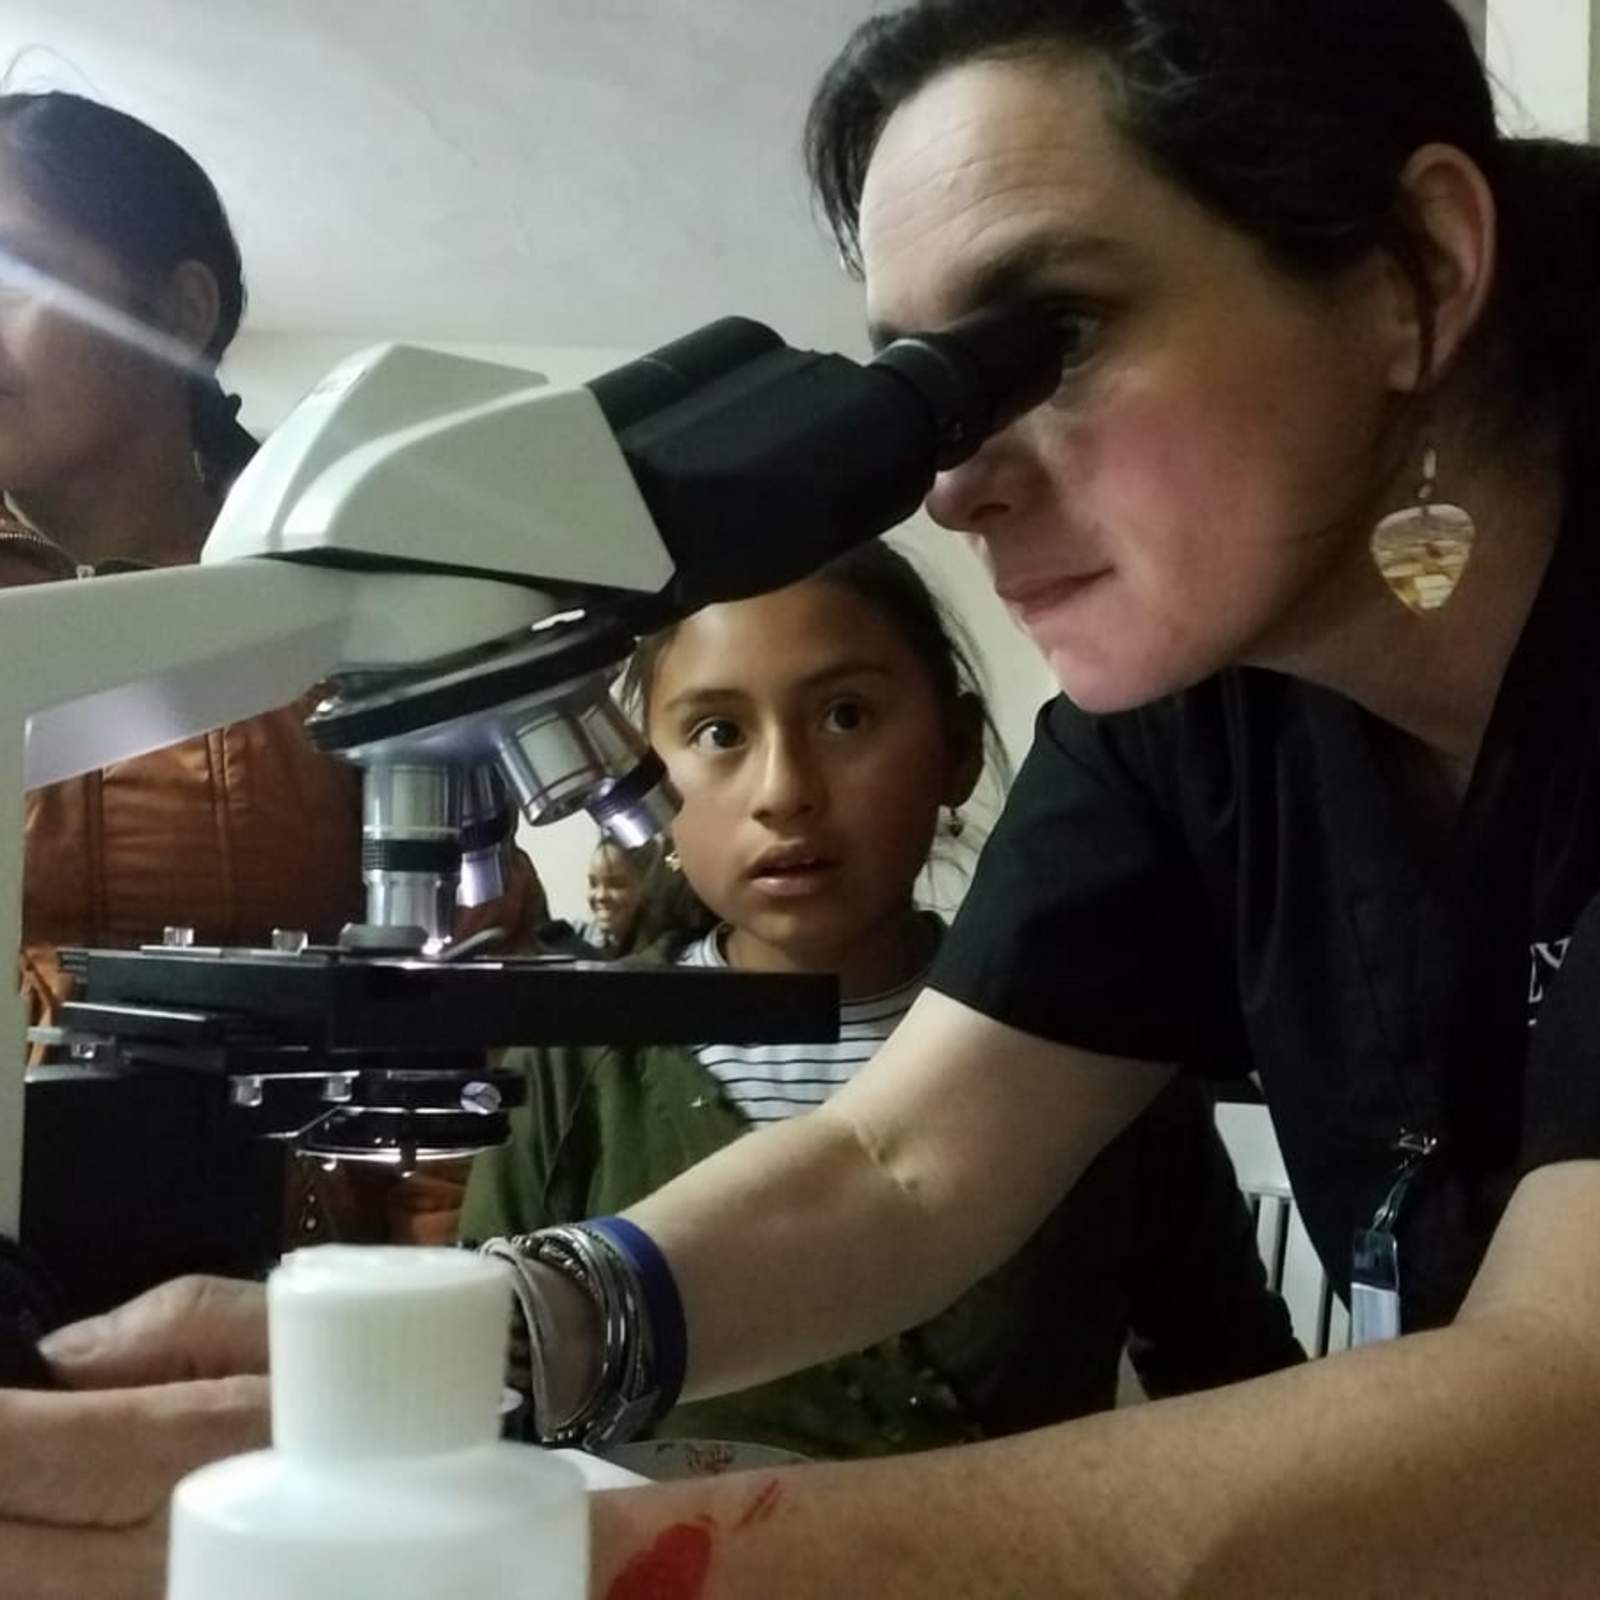 Professor showing a local Peruvian girl how to view a parasite under the microscope